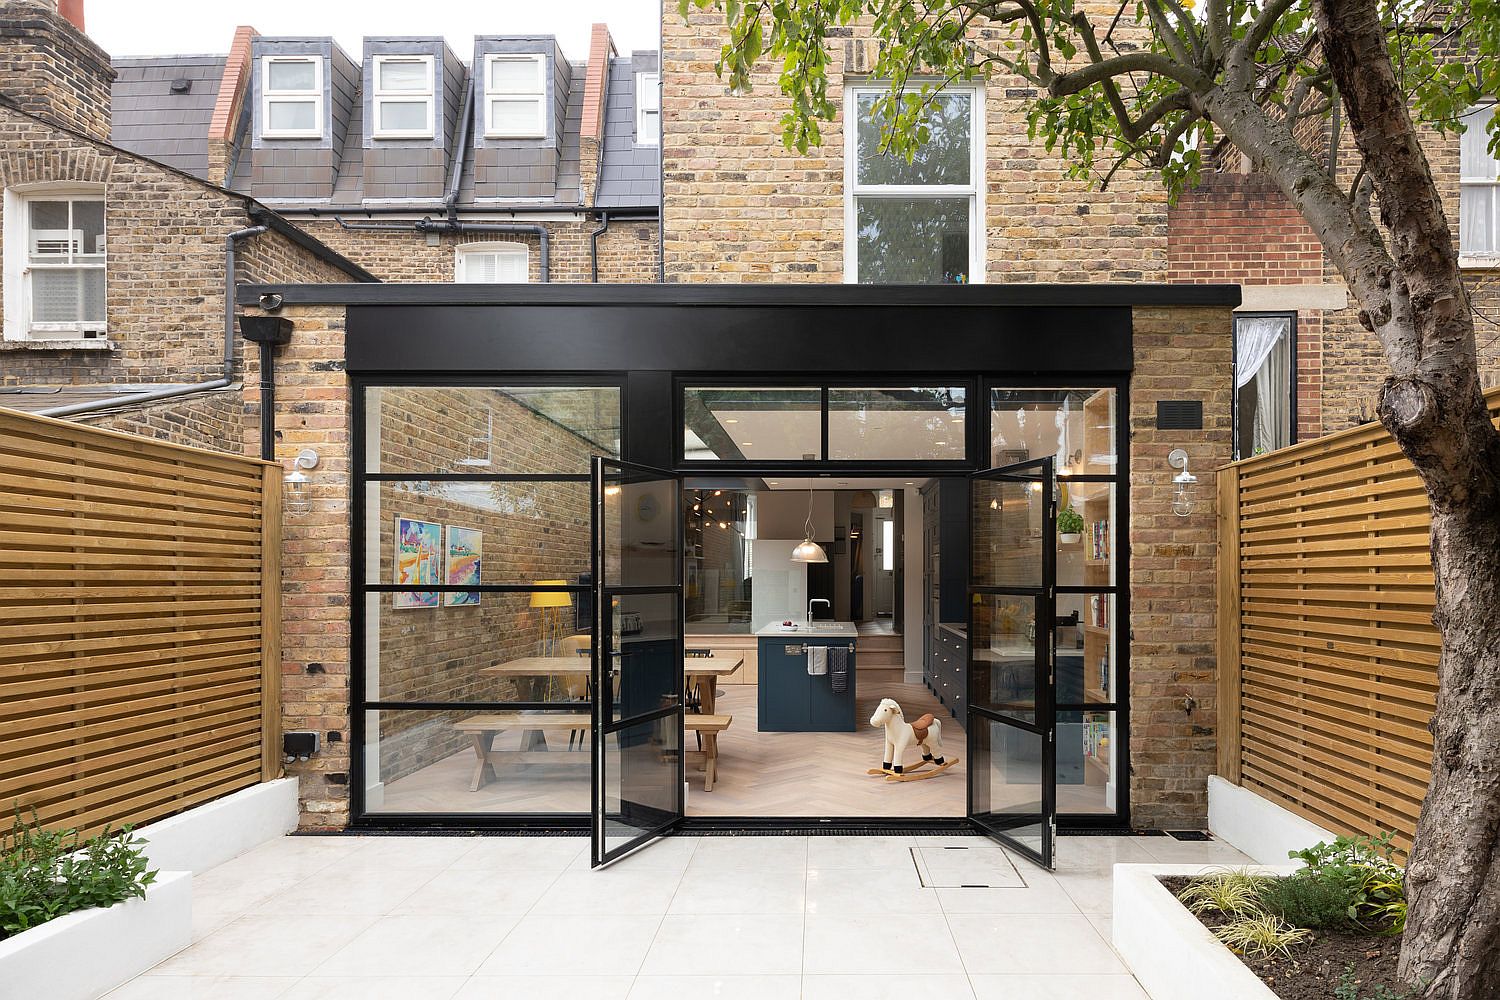 Contemporary rear extension in glass and steel for the classic British home